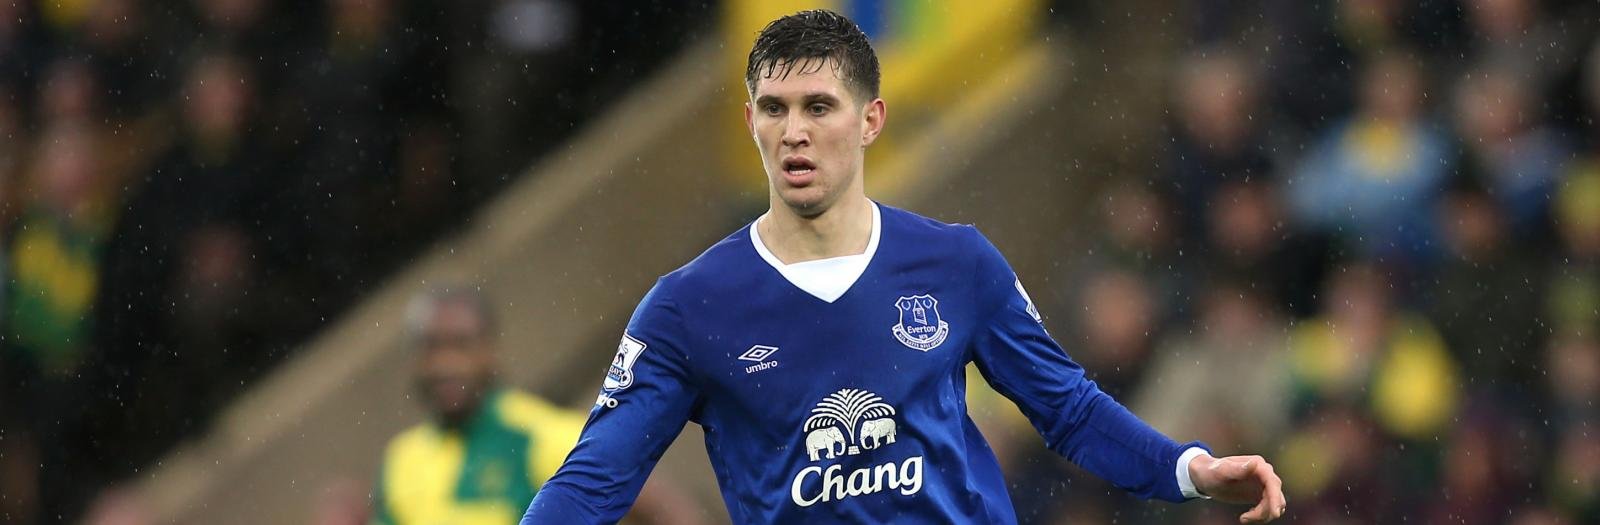 Everton’s John Stones named in Manchester City’s Champions League squad